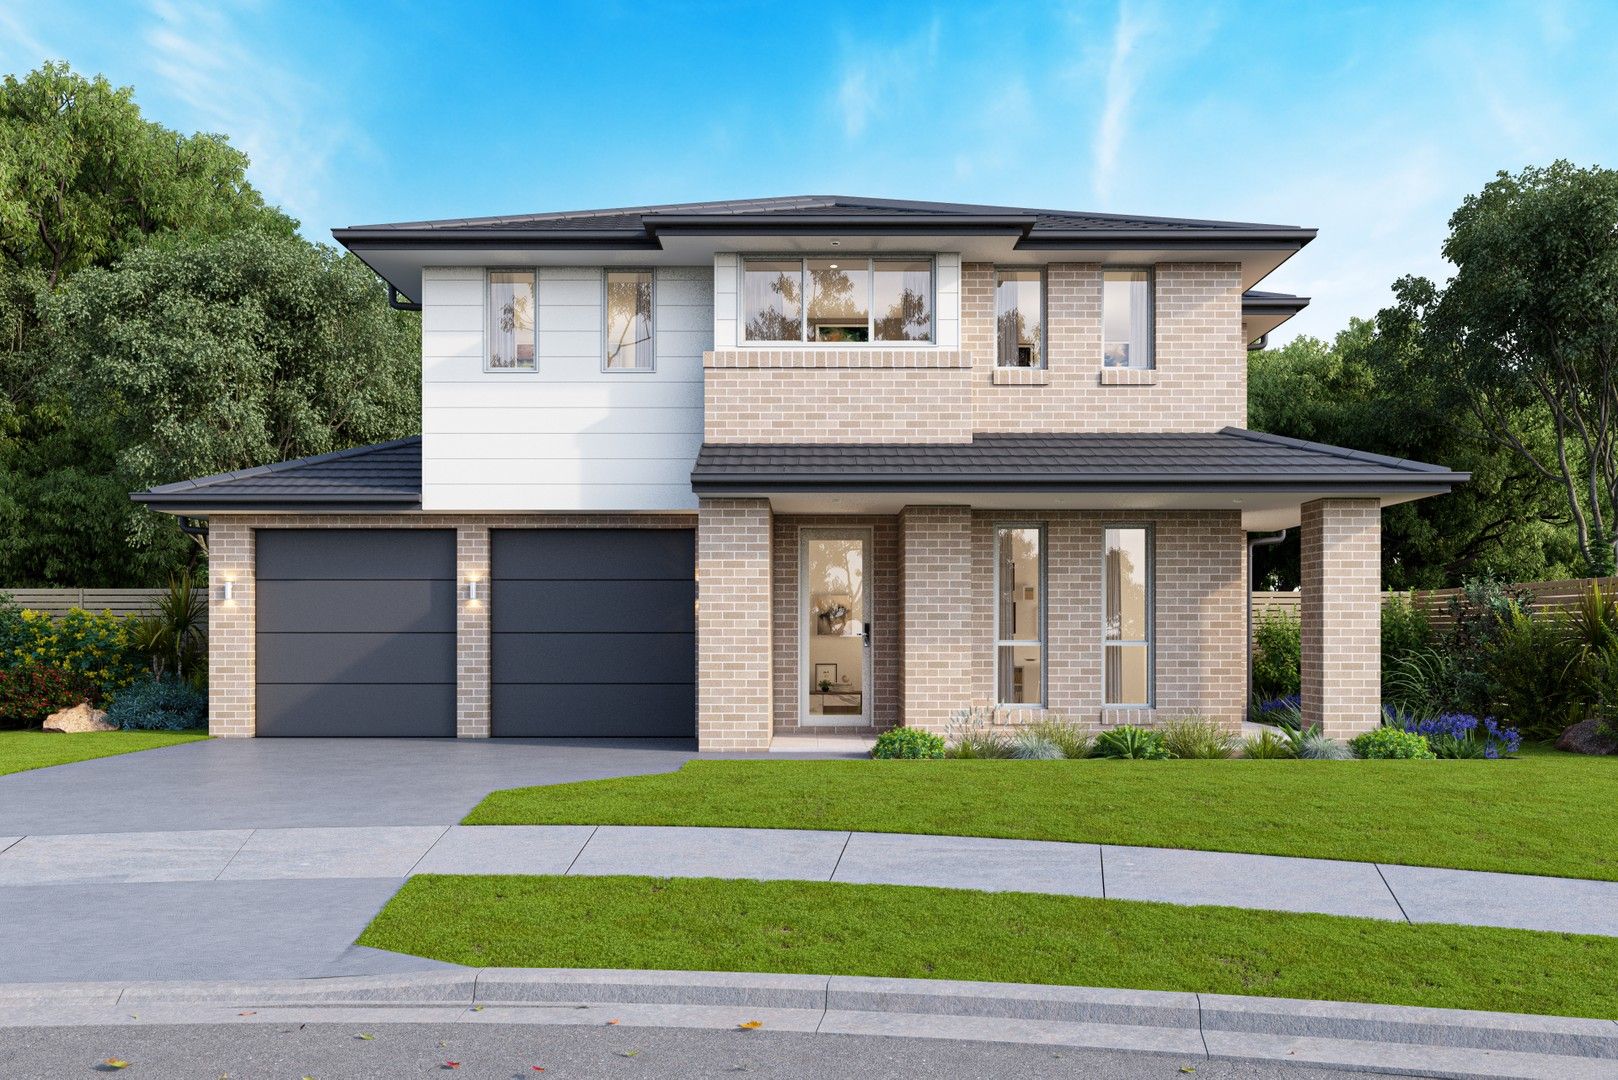 4 bedrooms New House & Land in Lot 1 Greenacre Drive TAHMOOR NSW, 2573